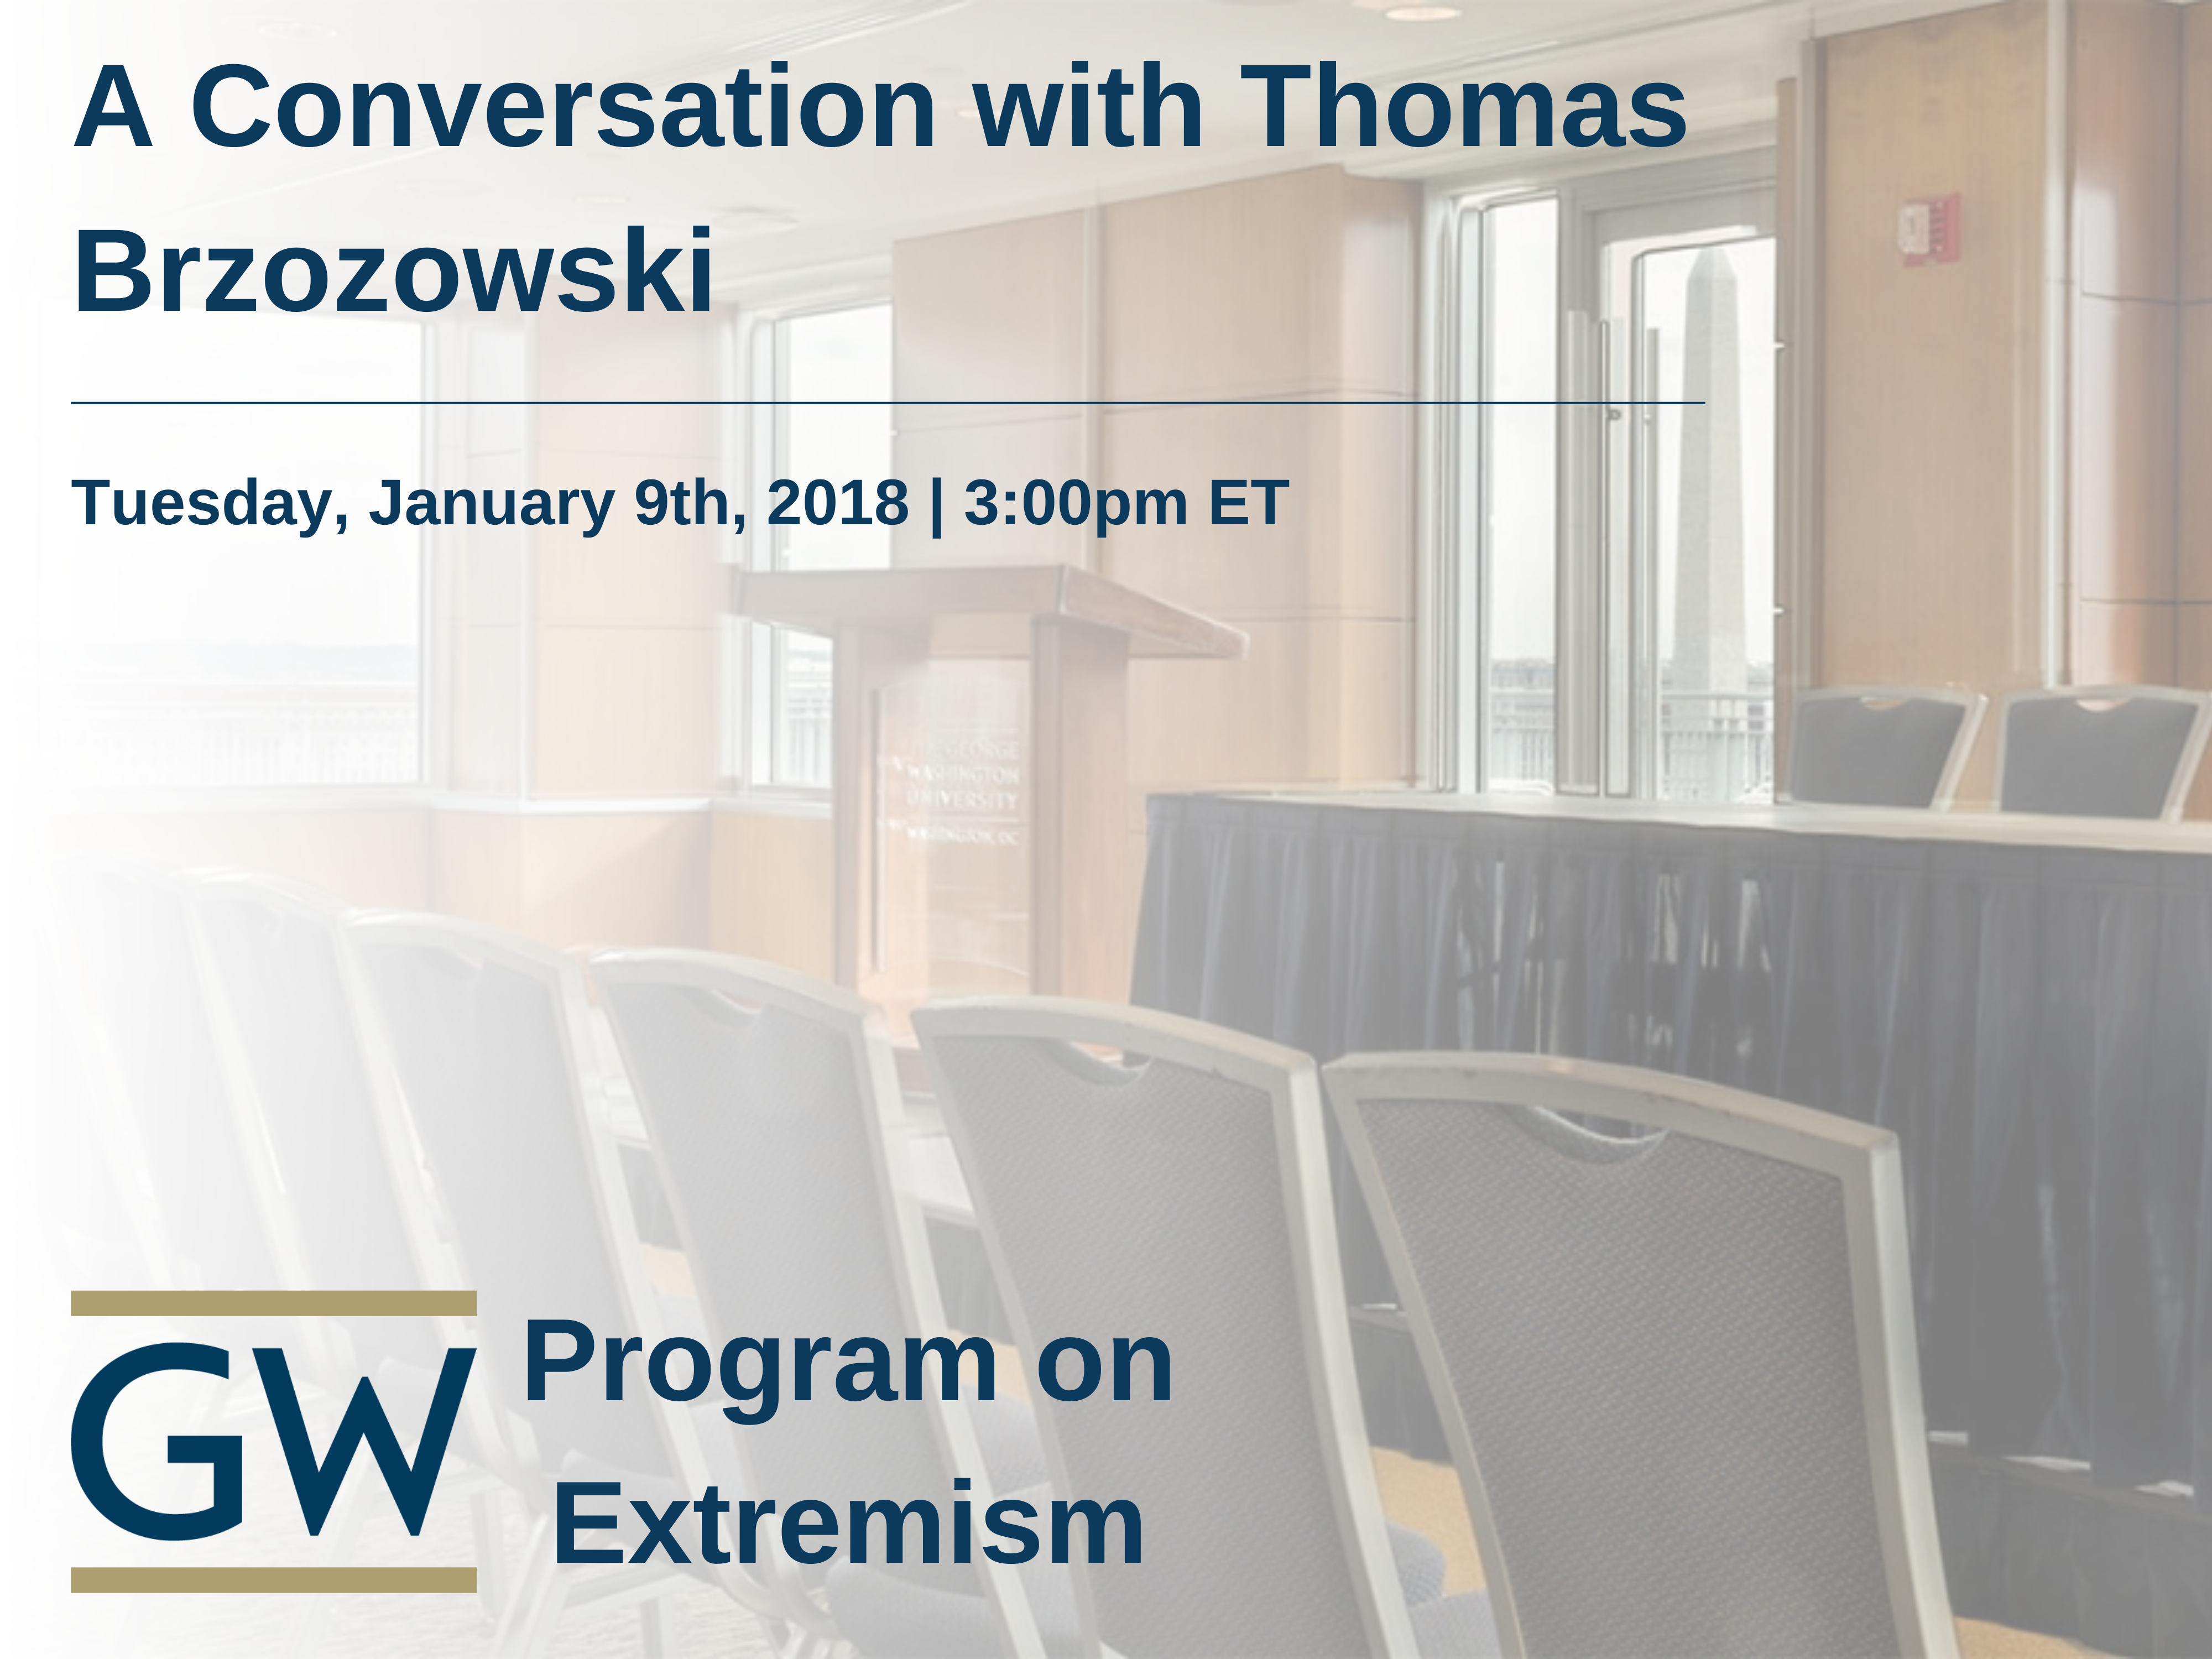 A Conversation with Thomas Brzozowski: The Counsel for Domestic Terrorism in the Department of Justice (DOJ)